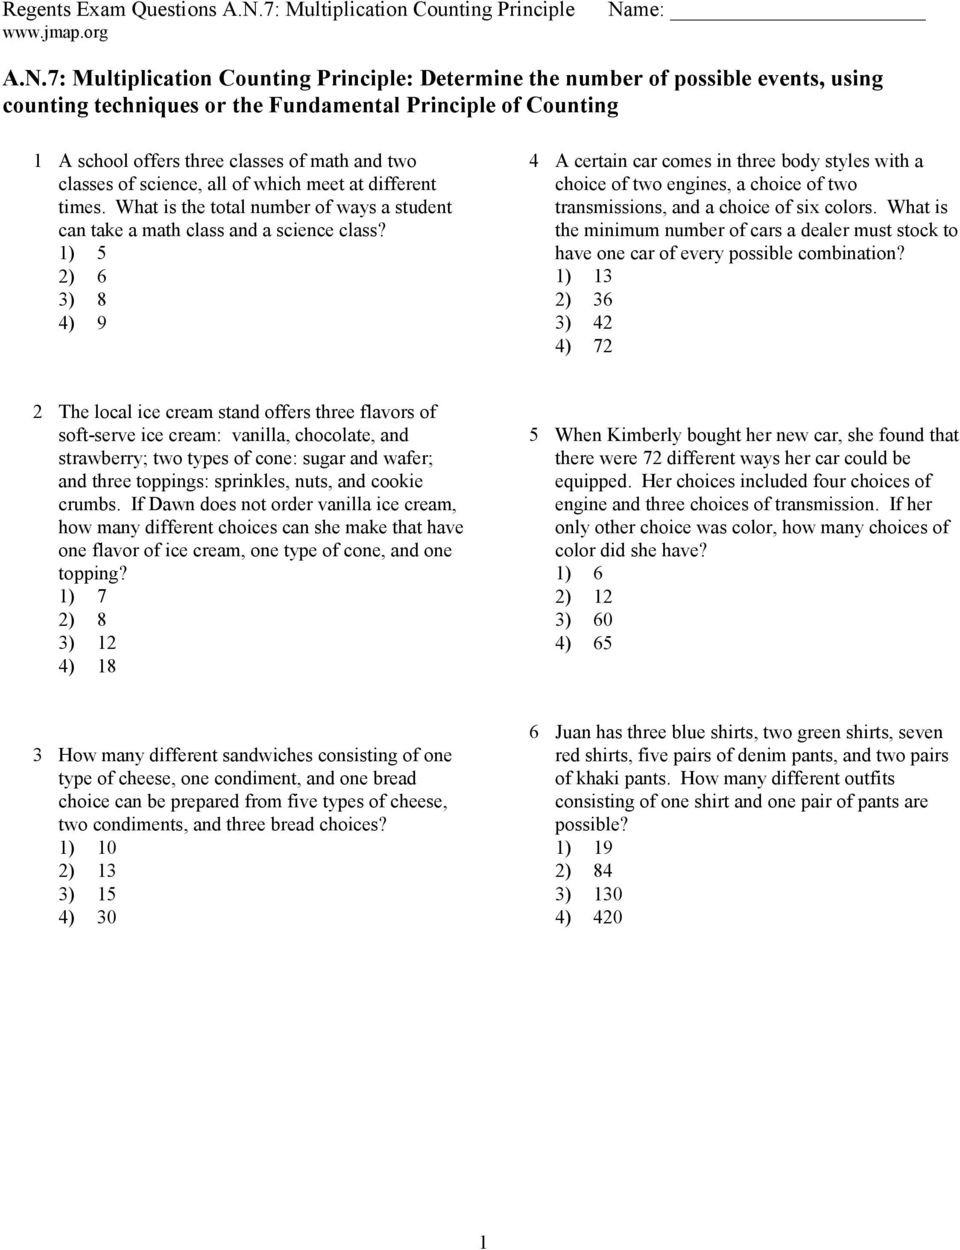 Fundamental Counting Principle Worksheet A N 7 Multiplication Counting Principle Determine the